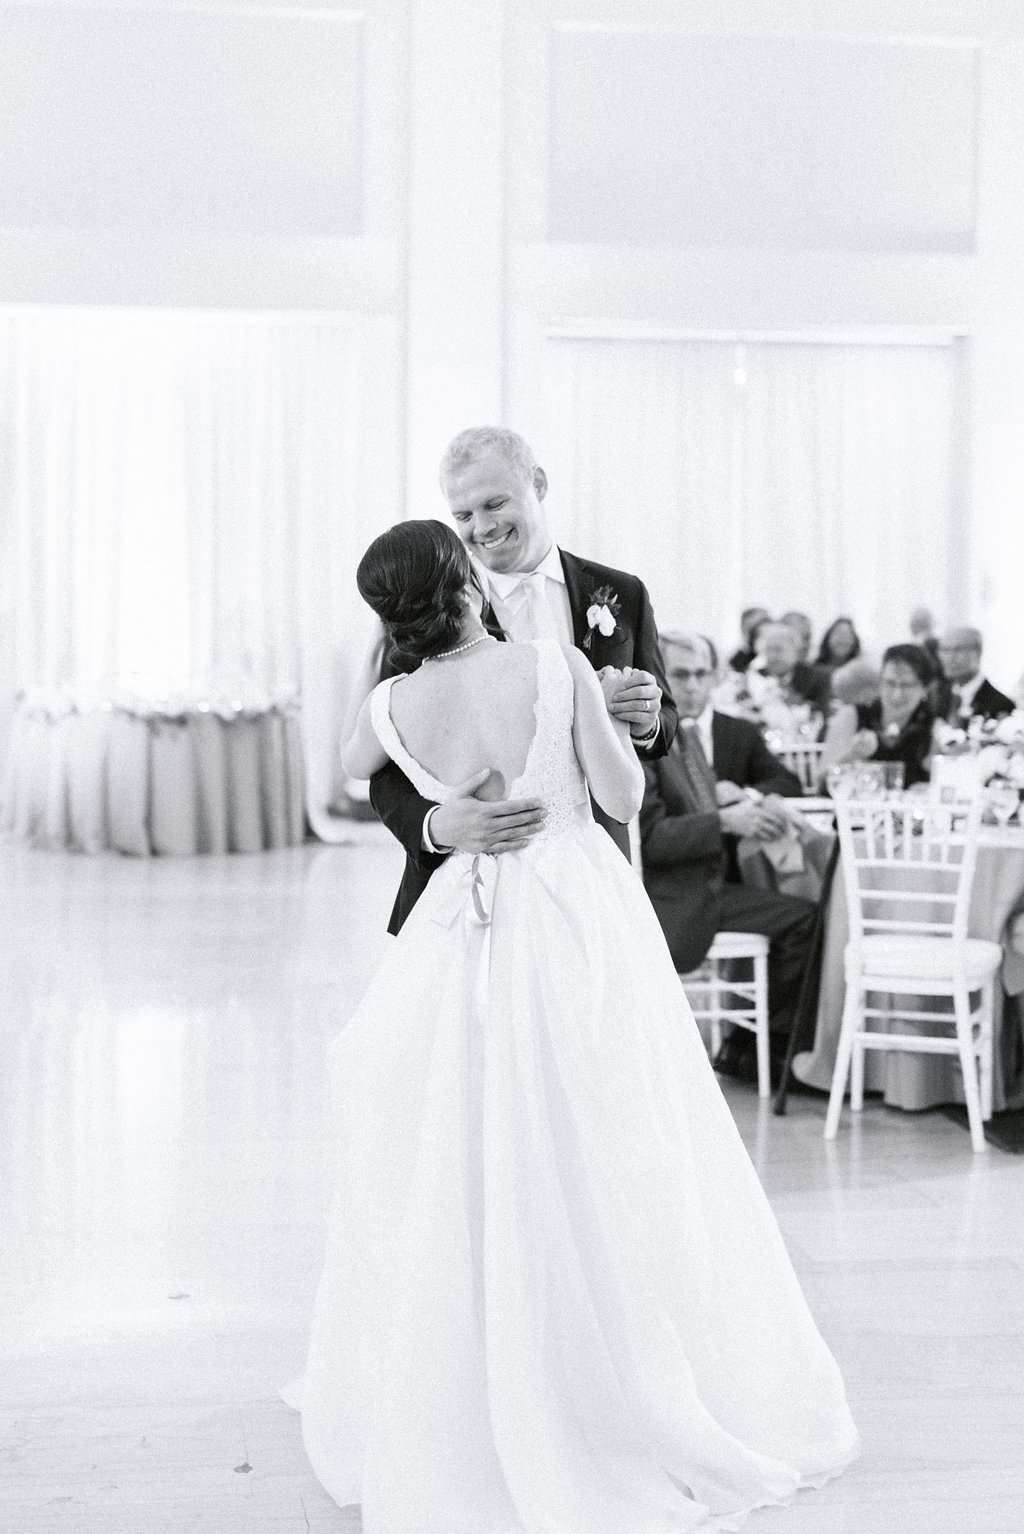 Florida Bride and Groom First Dance as Husband and Wife, Wedding Reception Portrait